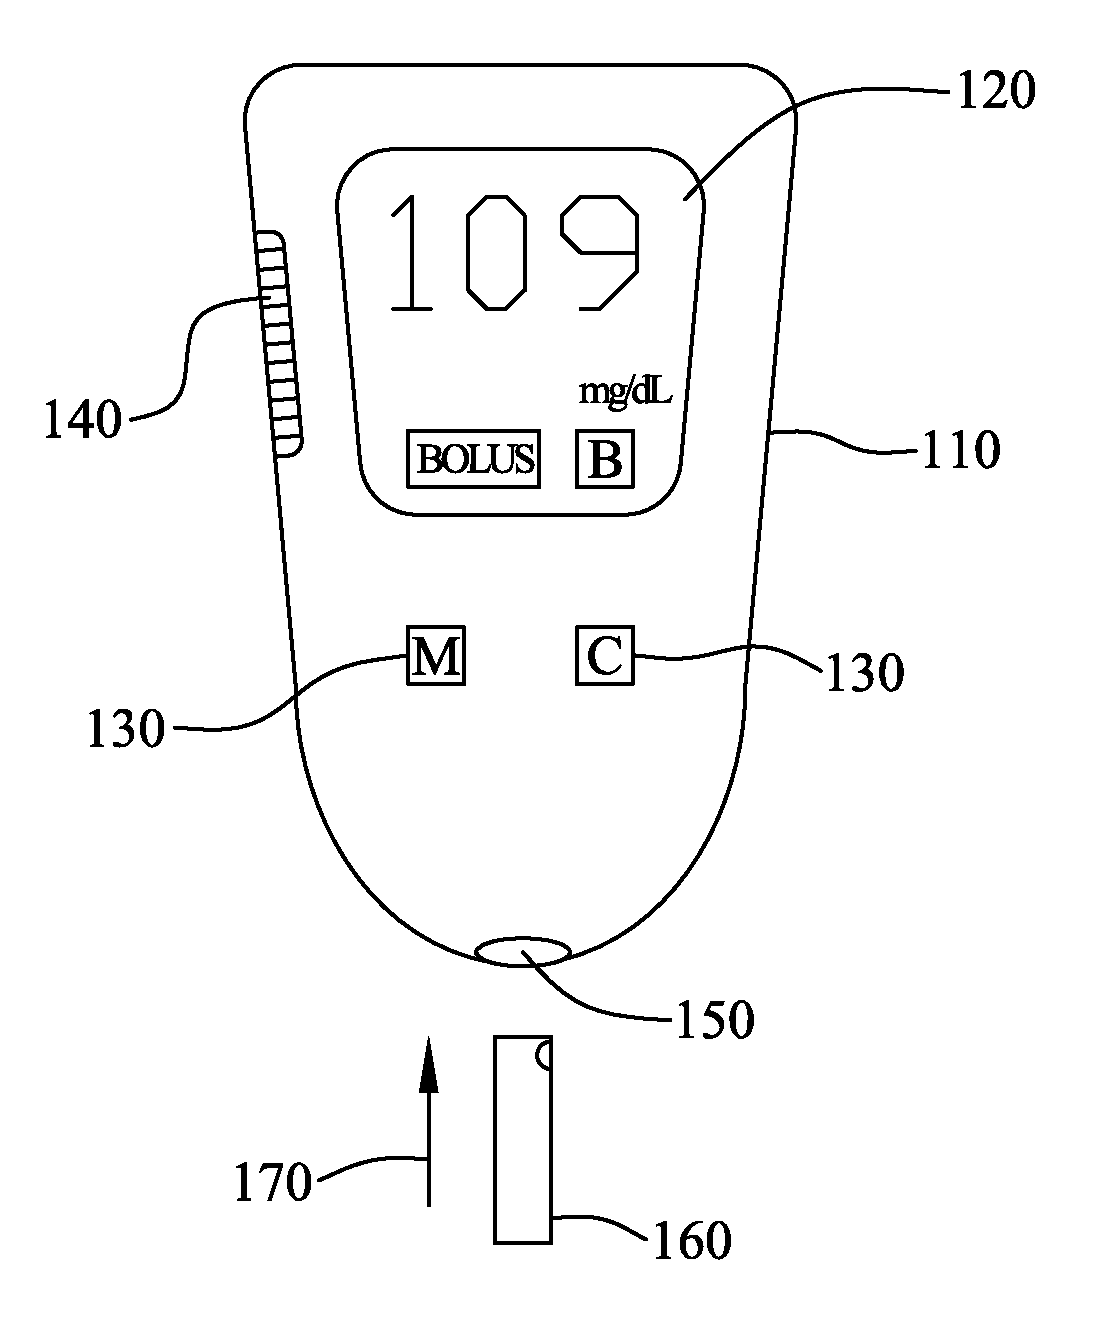 Analyte monitoring devices and methods therefor